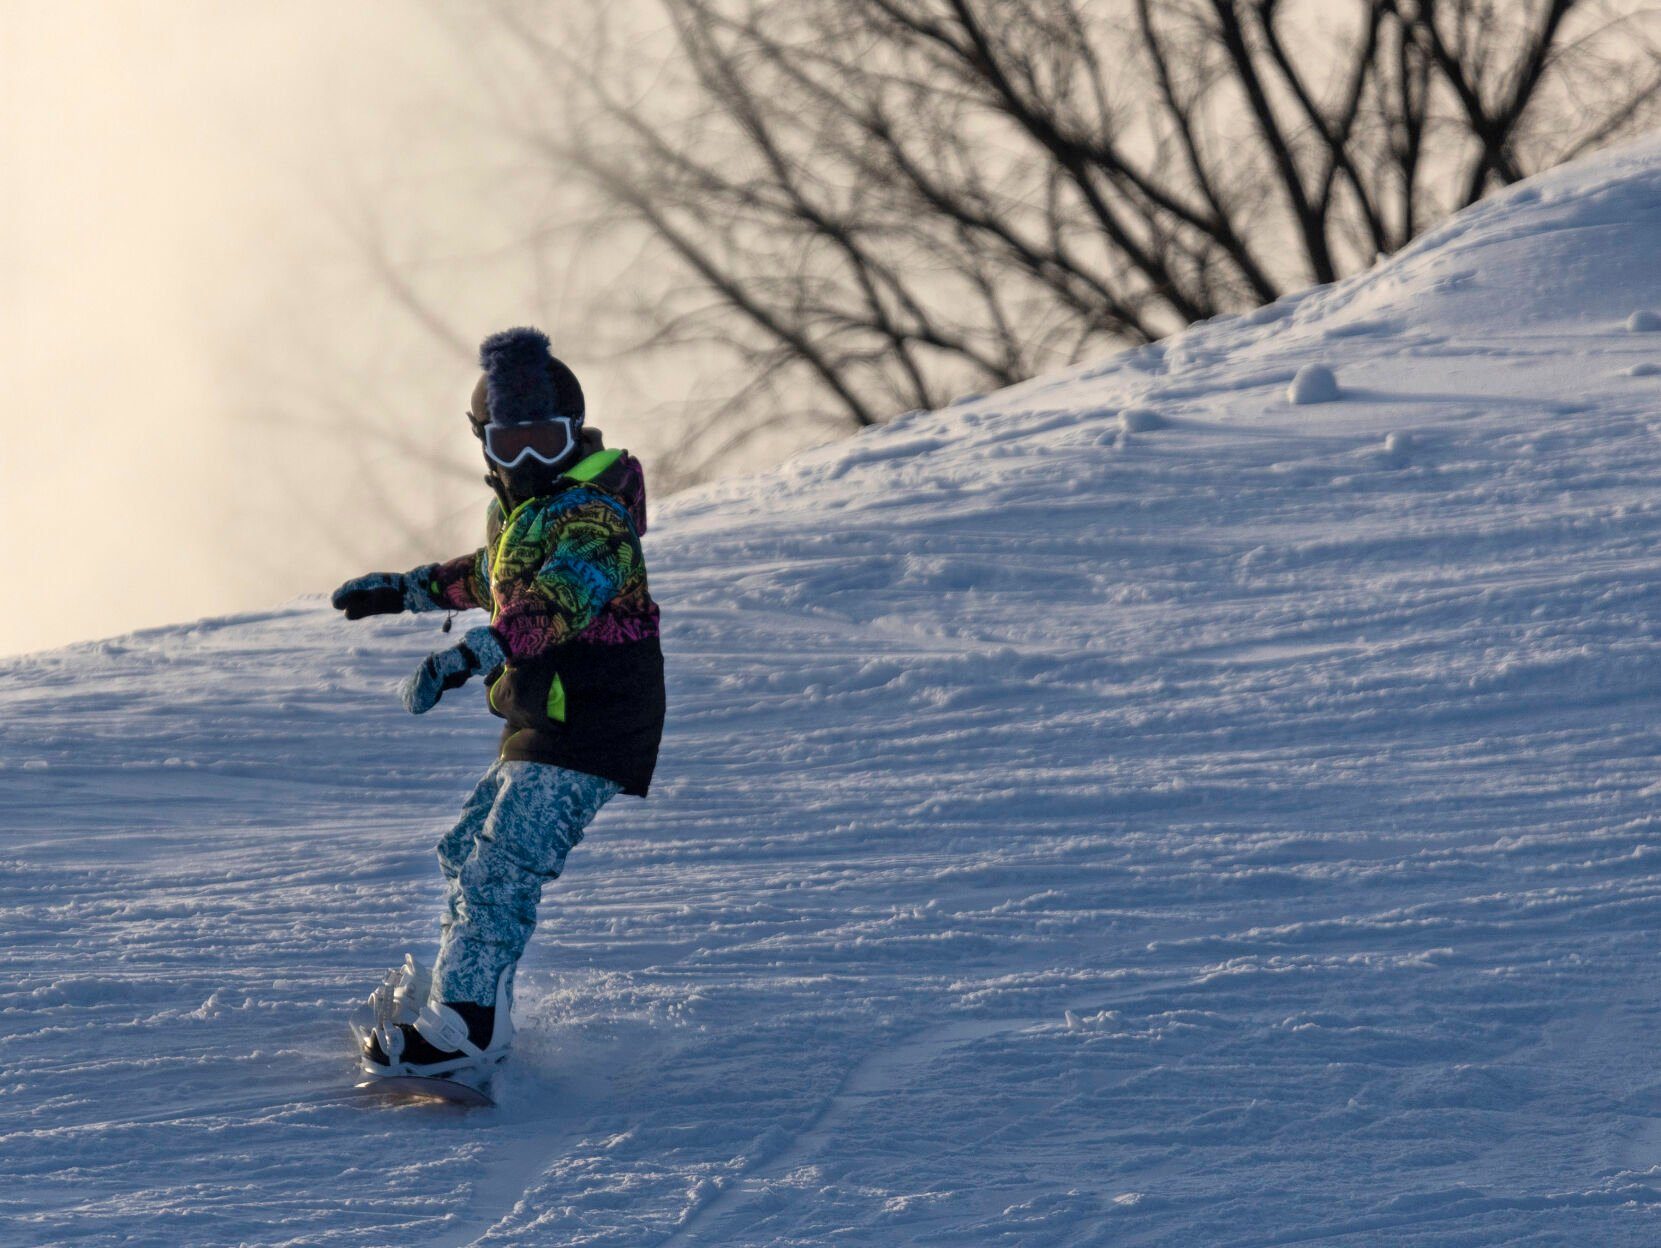 A young snowboarder glides down a slope at Sundown Mountain Resort, west of Dubuque and Asbury, Iowa, earlier this month. The resort is celebrating 50 seasons in operation this winter.    PHOTO CREDIT: Stephen Gassman